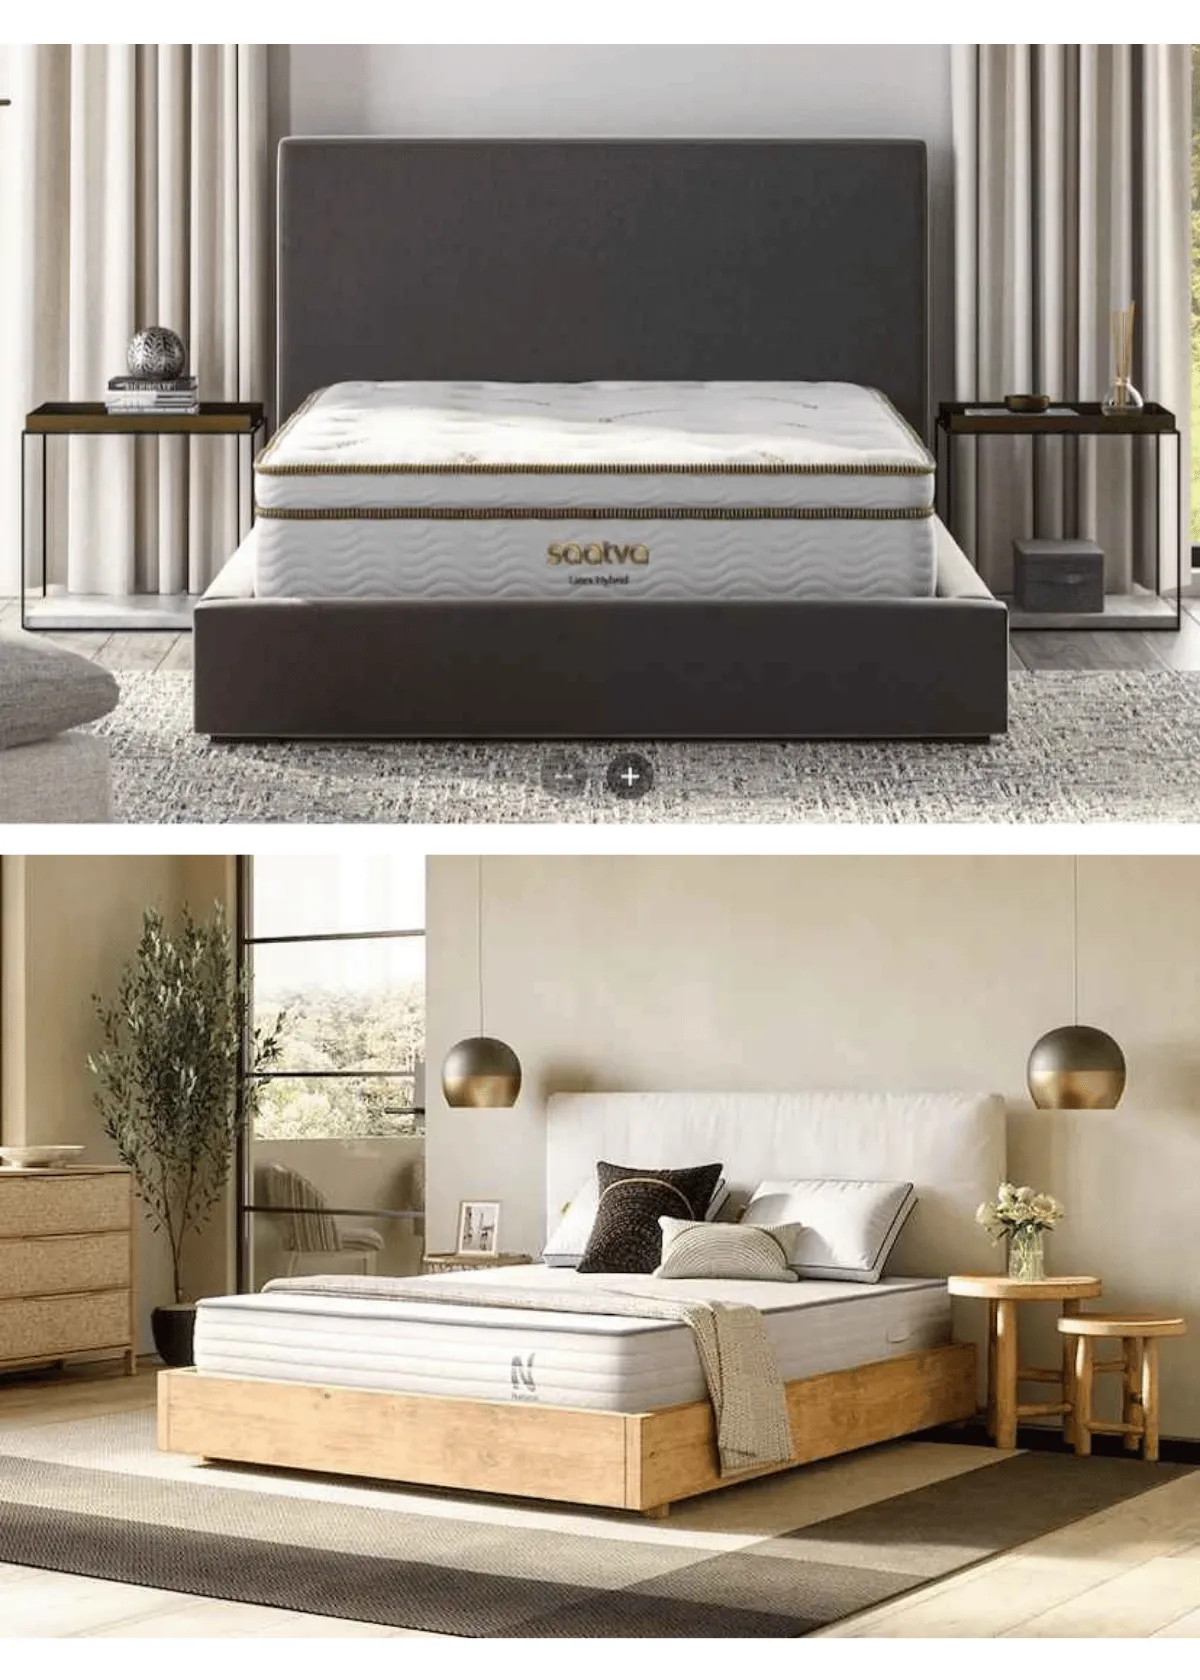 "Latex Mattress: The Best Natural Options for Side Sleepers”